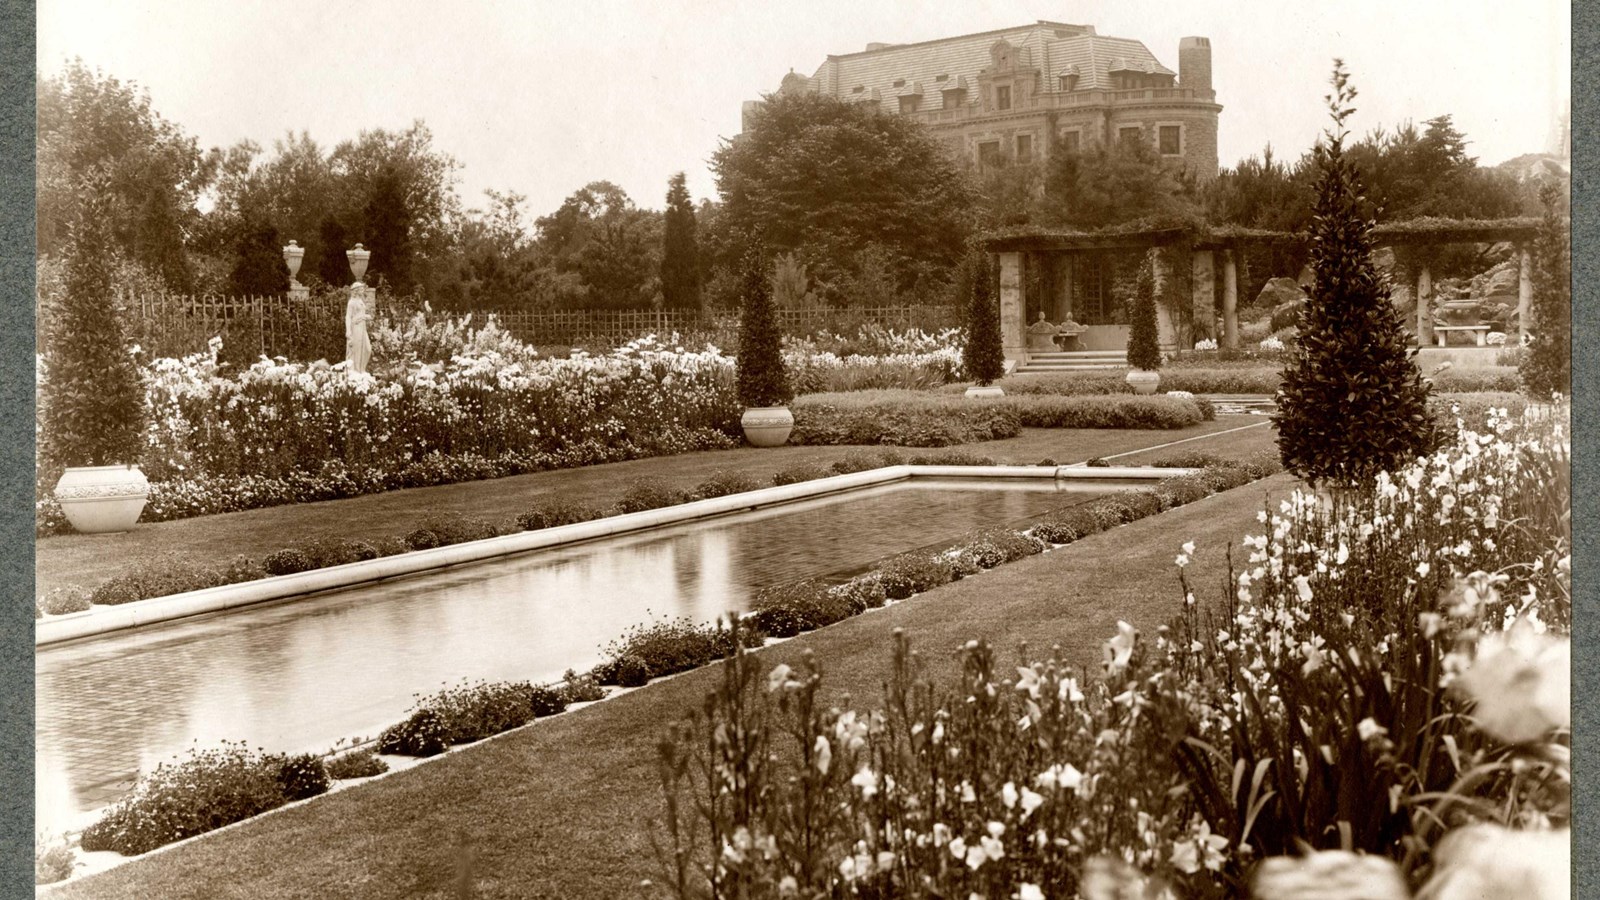 Black and white of rectangular pool on flat grassy area with flowers on edge, large house on hill